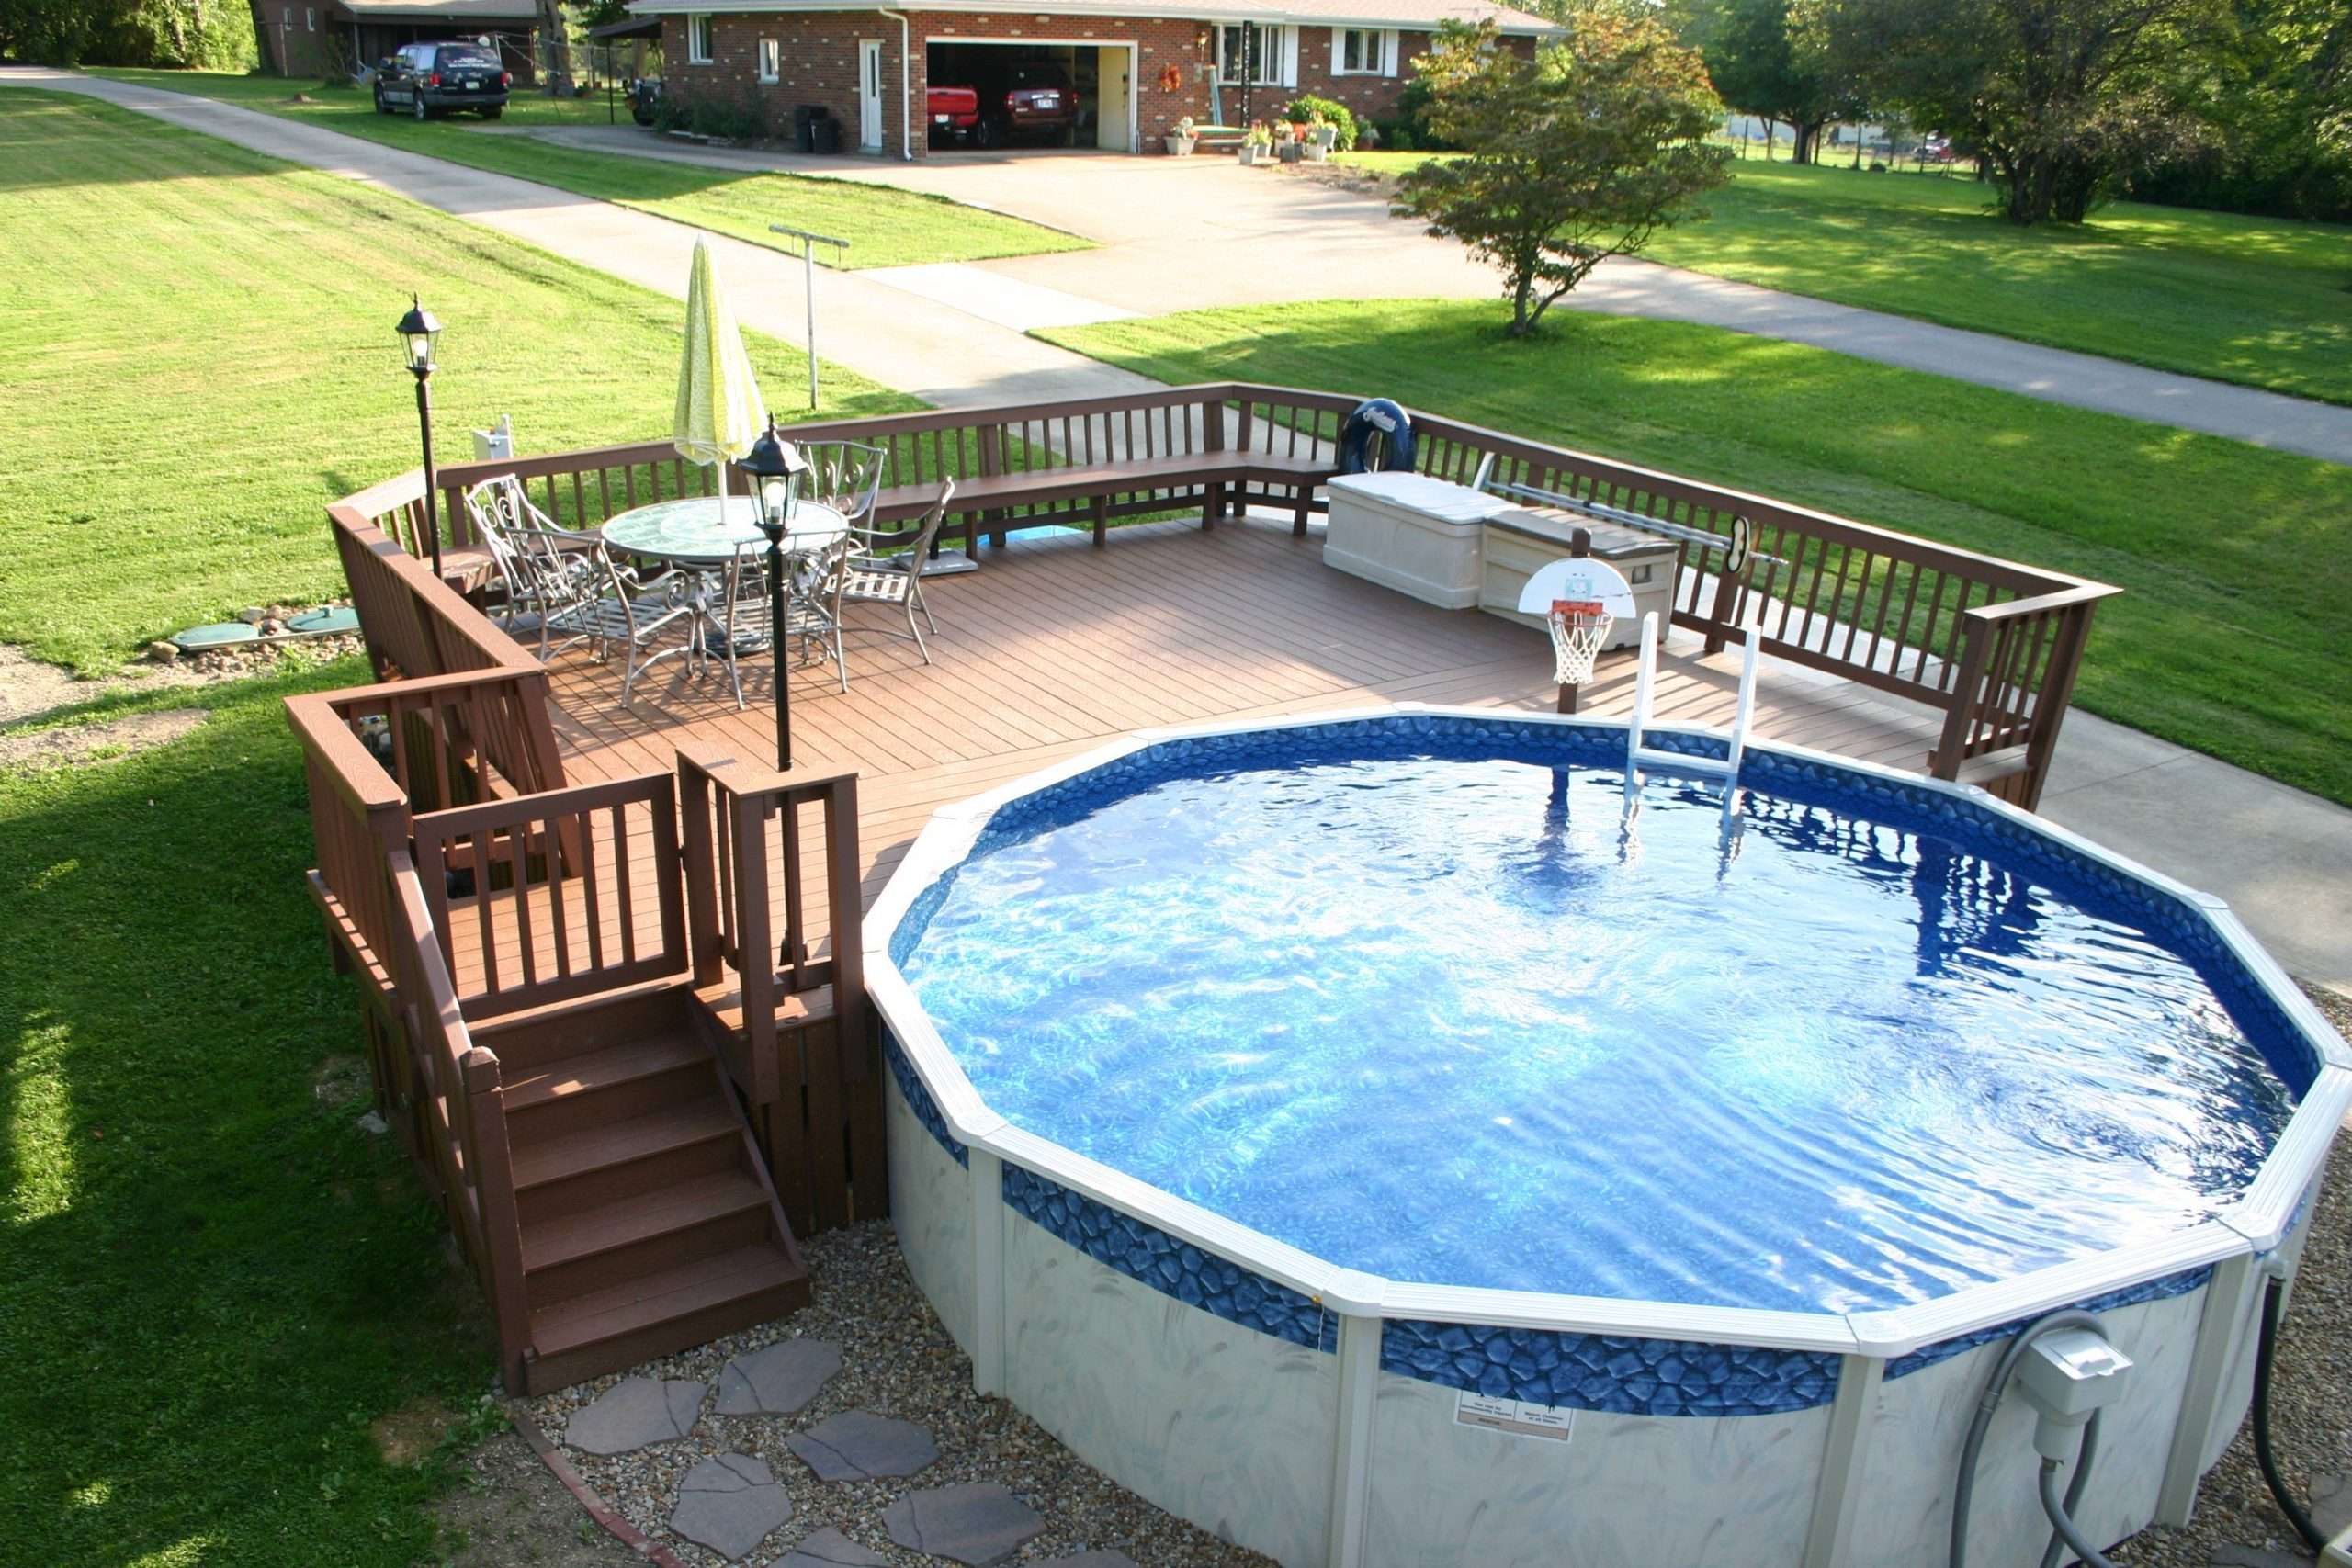 How to Install an Overlap Liner for your Above Ground Pool